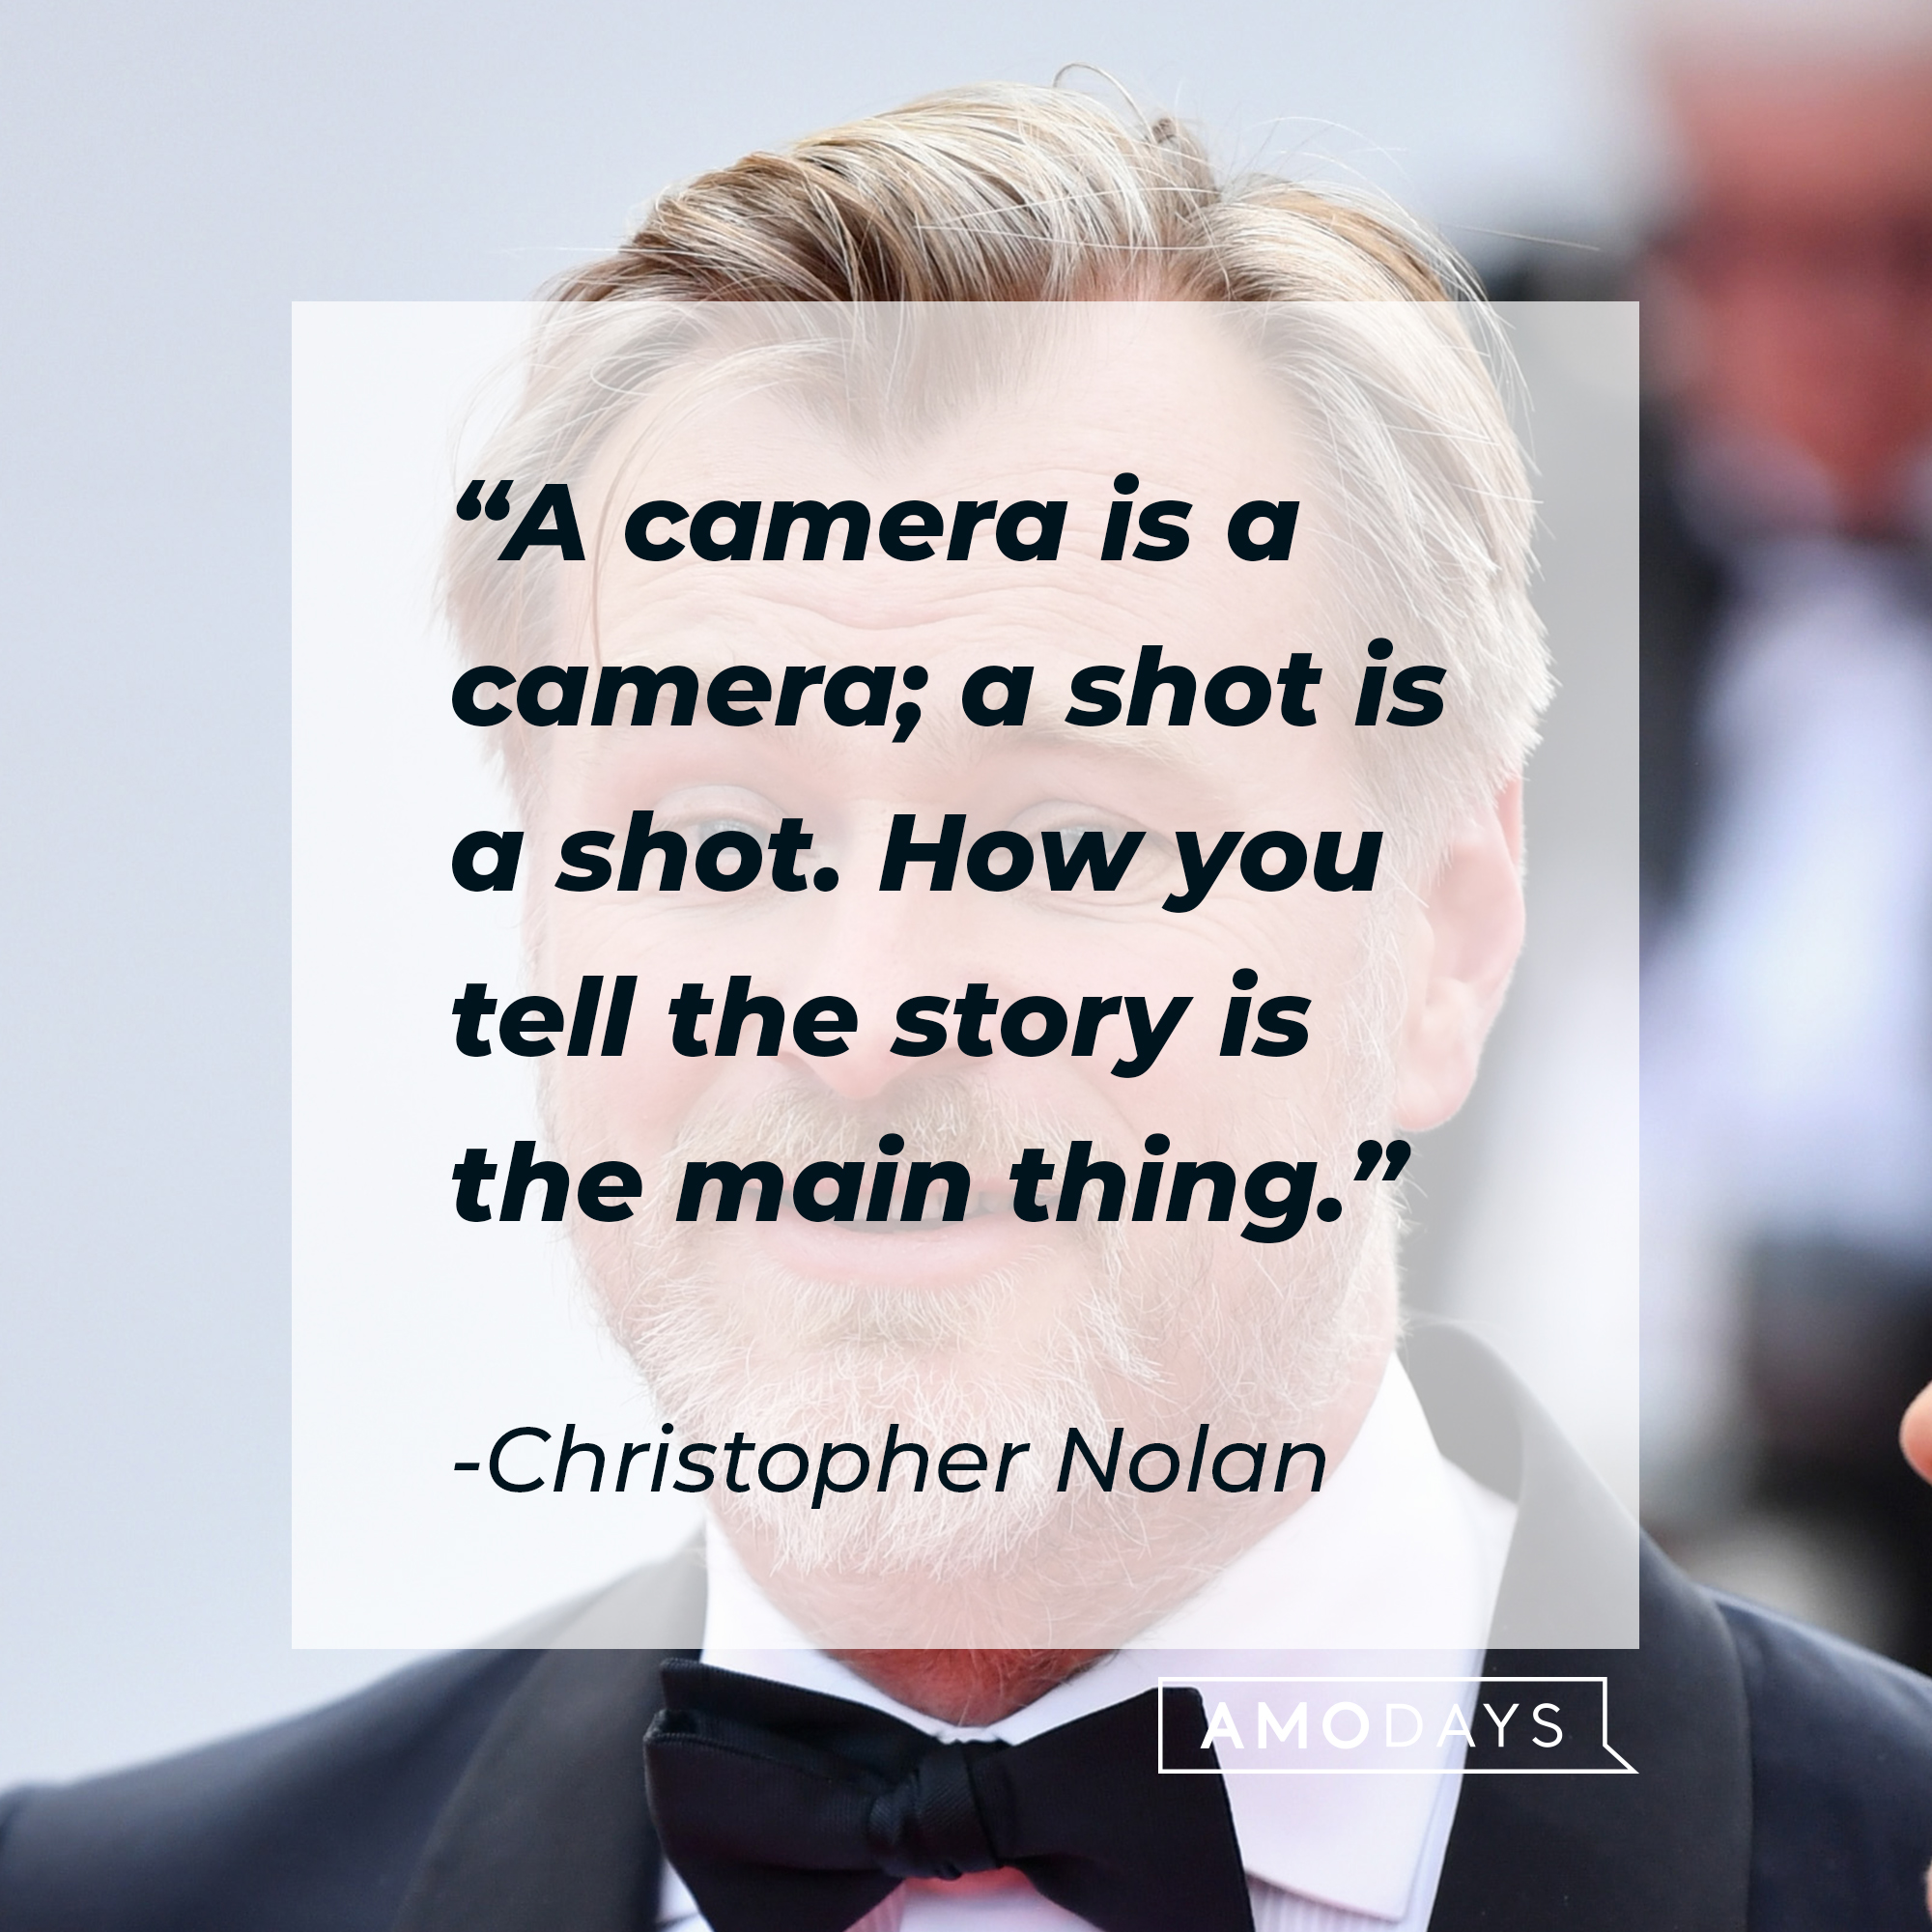 Christopher Nolan, with his quote: “A camera is a camera; a shot is a shot. How you tell the story is the main thing.” | Source: Getty Images